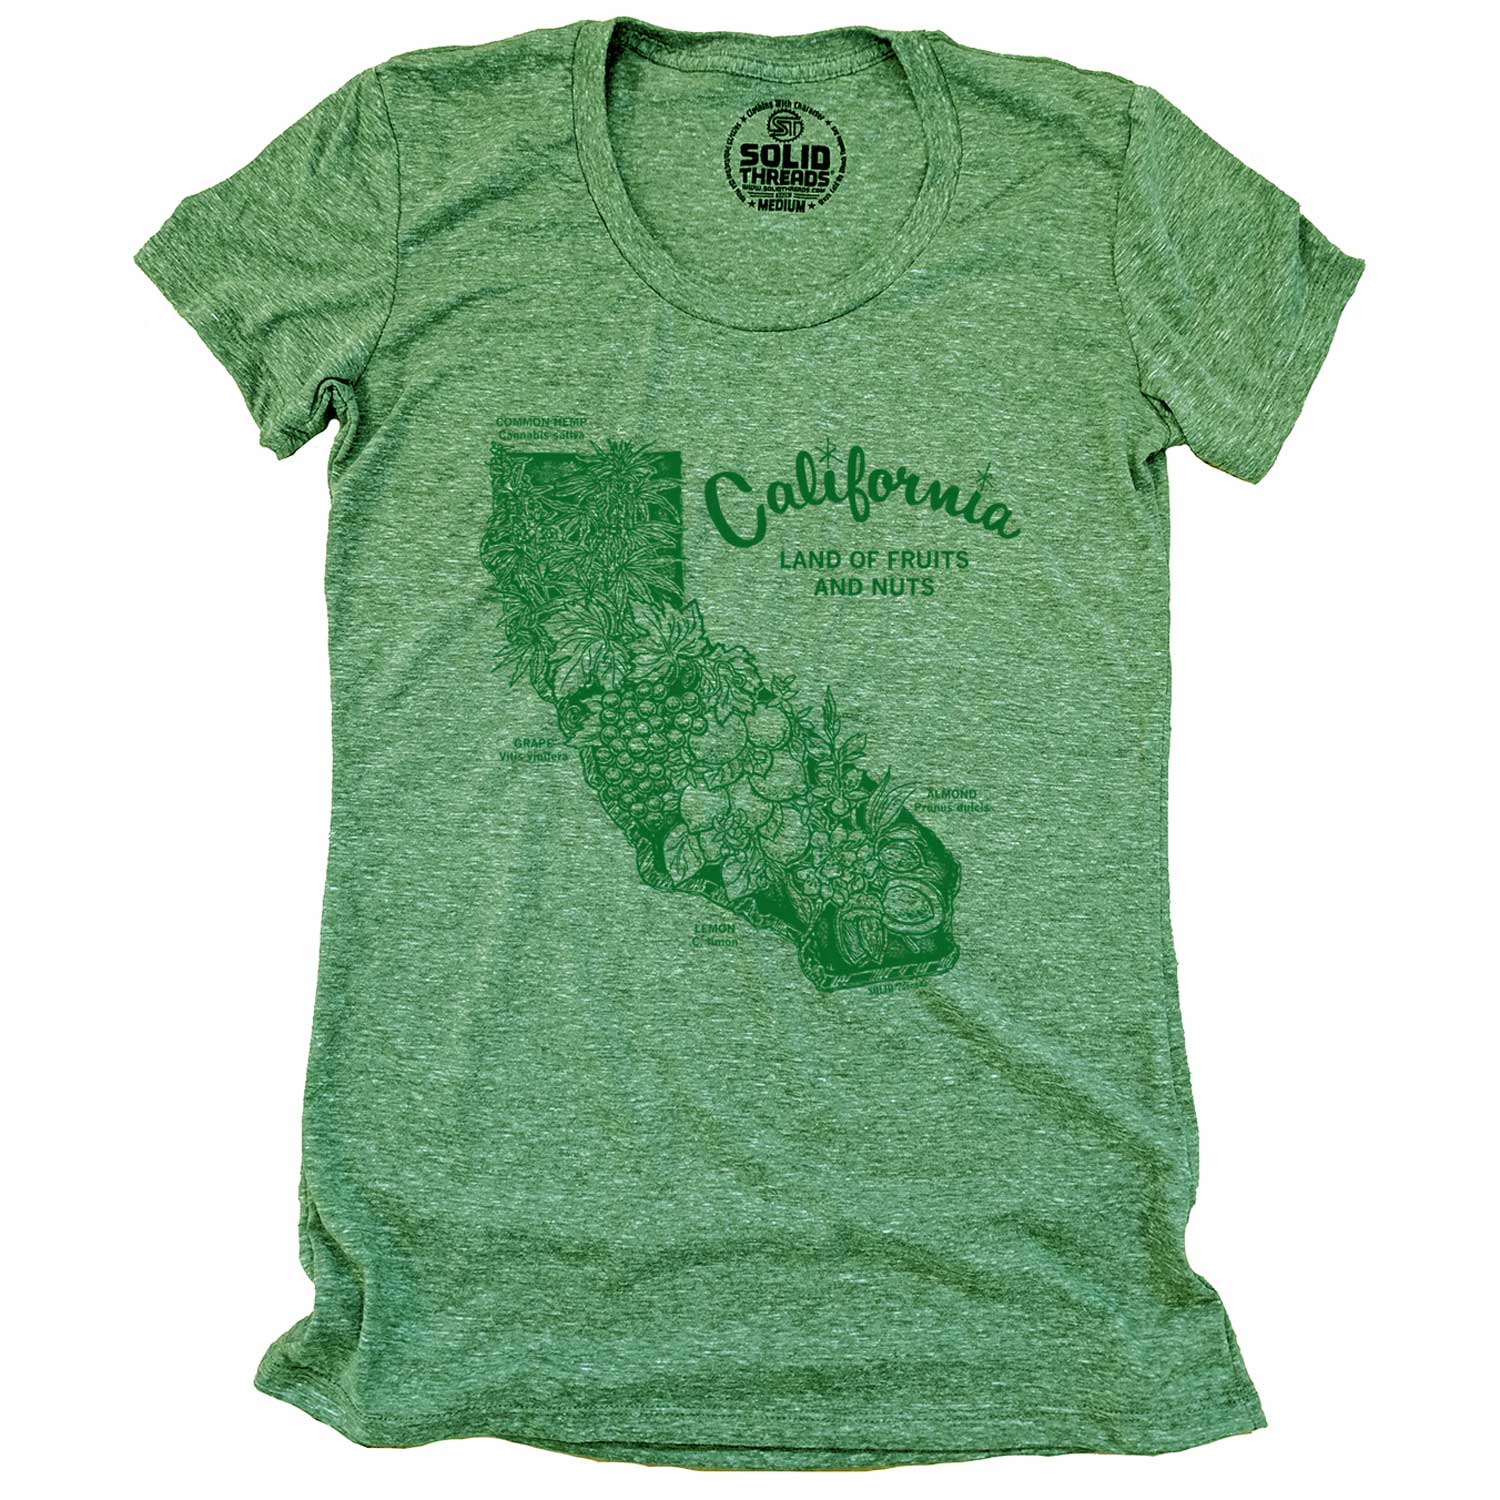 Women's California Land of Fruits and Nuts Vintage Inspired T-shirt | Funny California Graphic Tee | Solid Threads